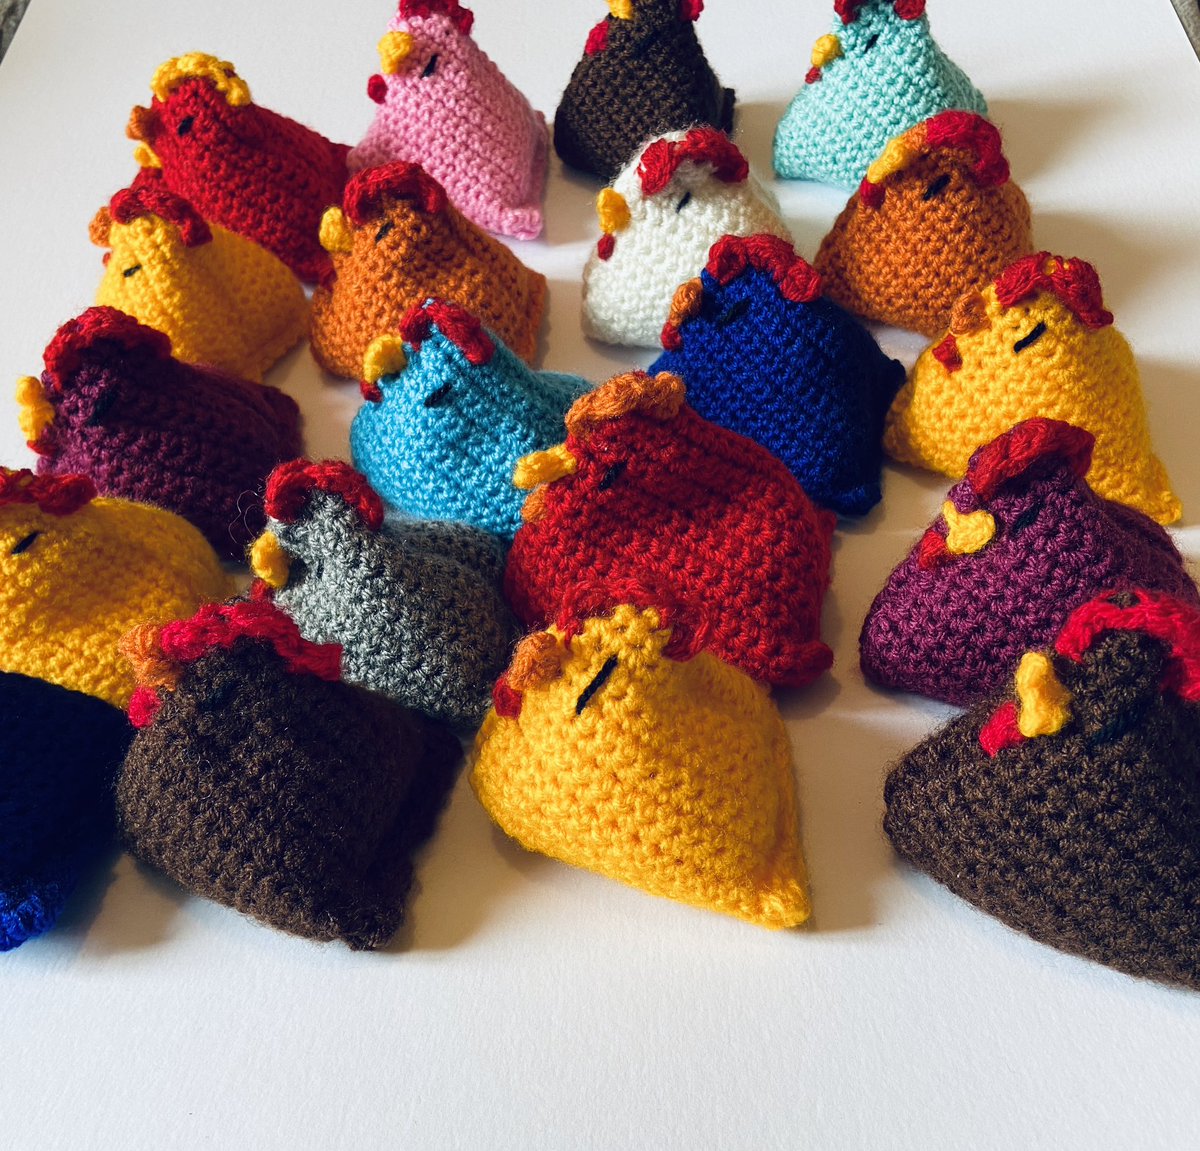 Today it’s #dancelikeachickenday (🤷‍♀️😂) so here’s a throwback to some colourful chicks I made  🐥 they’re beanbags, paperweights, or fabric weights- they use them a lot on the #sewingbee! 

Available in my #etsy shop okthenwhatsnextcraft.etsy.com

#elevenseshour #etsy #earlybiz